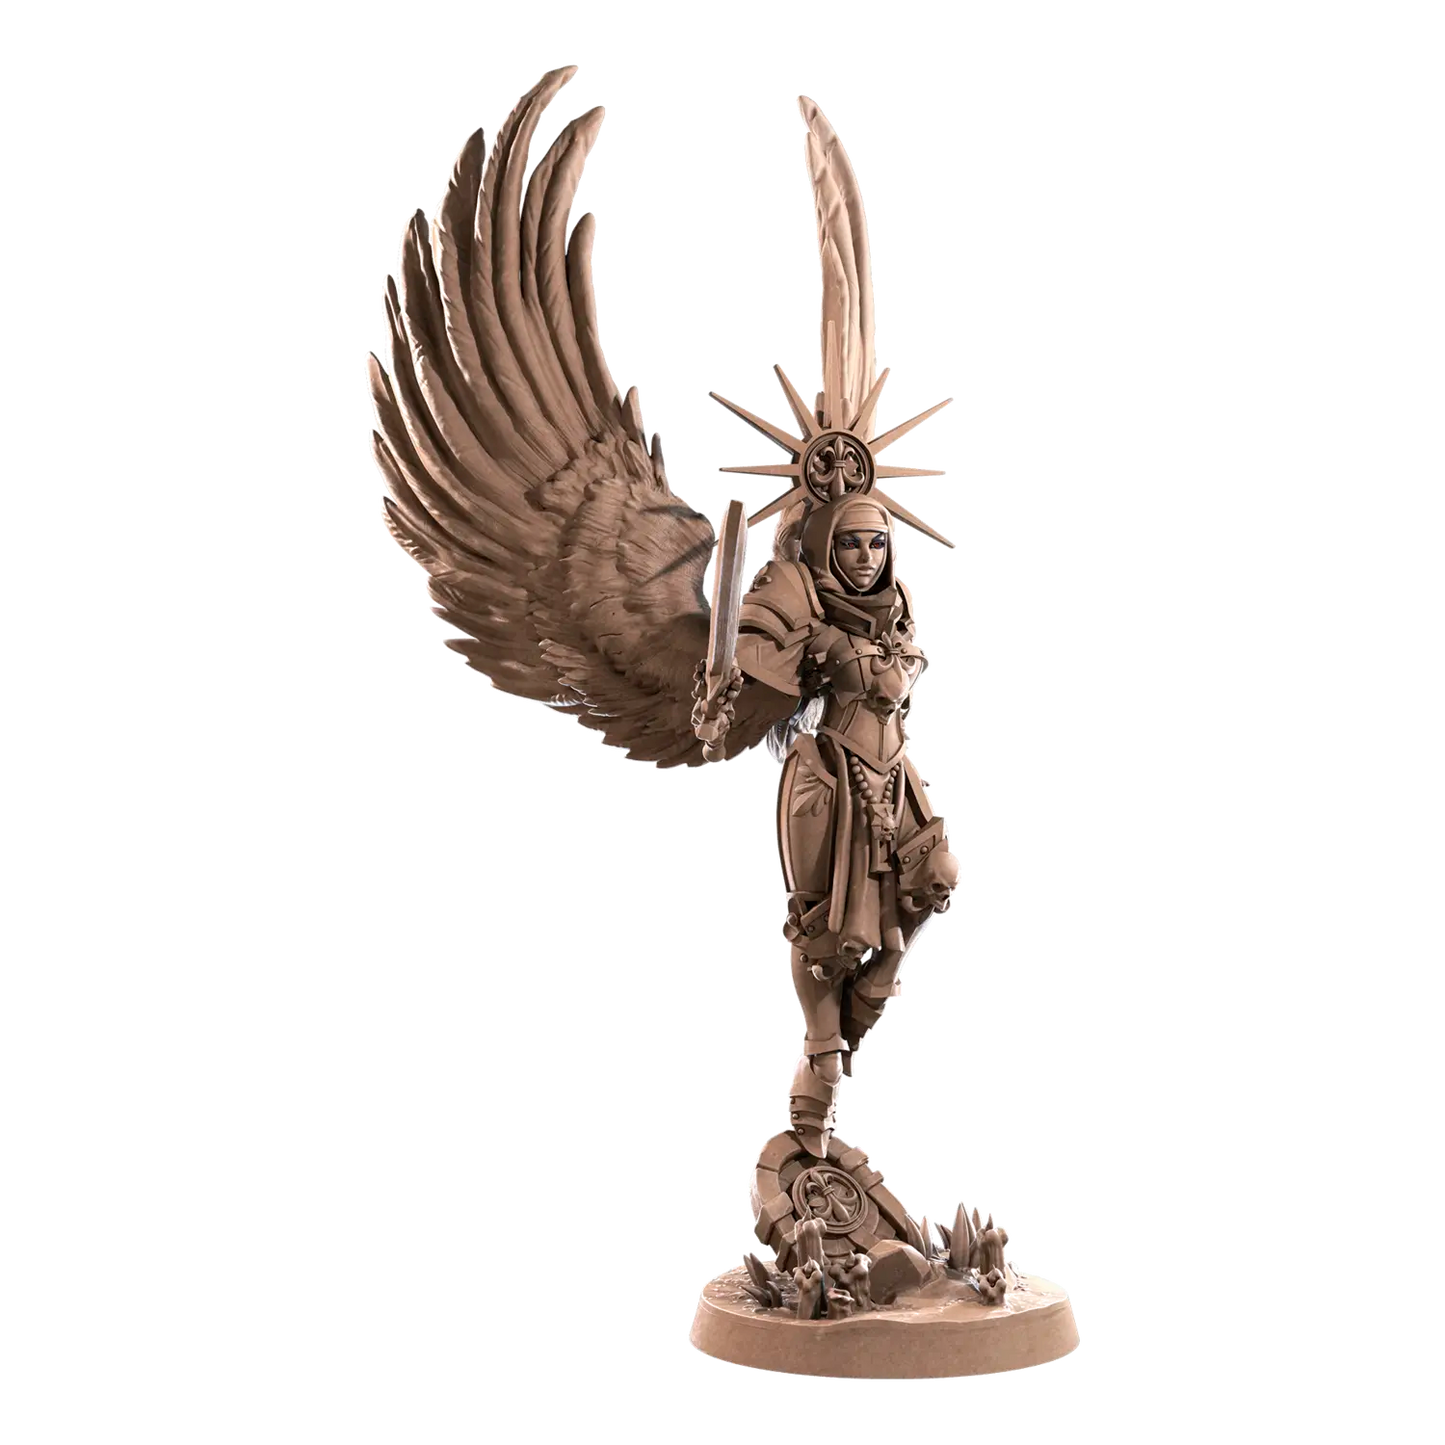 DnD Angel - Battle Sisters - Fighter - Human - Miniature - Paladin Evangeline 02 Angel - Battle Sisters - Fighter - Human - Miniature - Paladin sold by DoubleHitShop